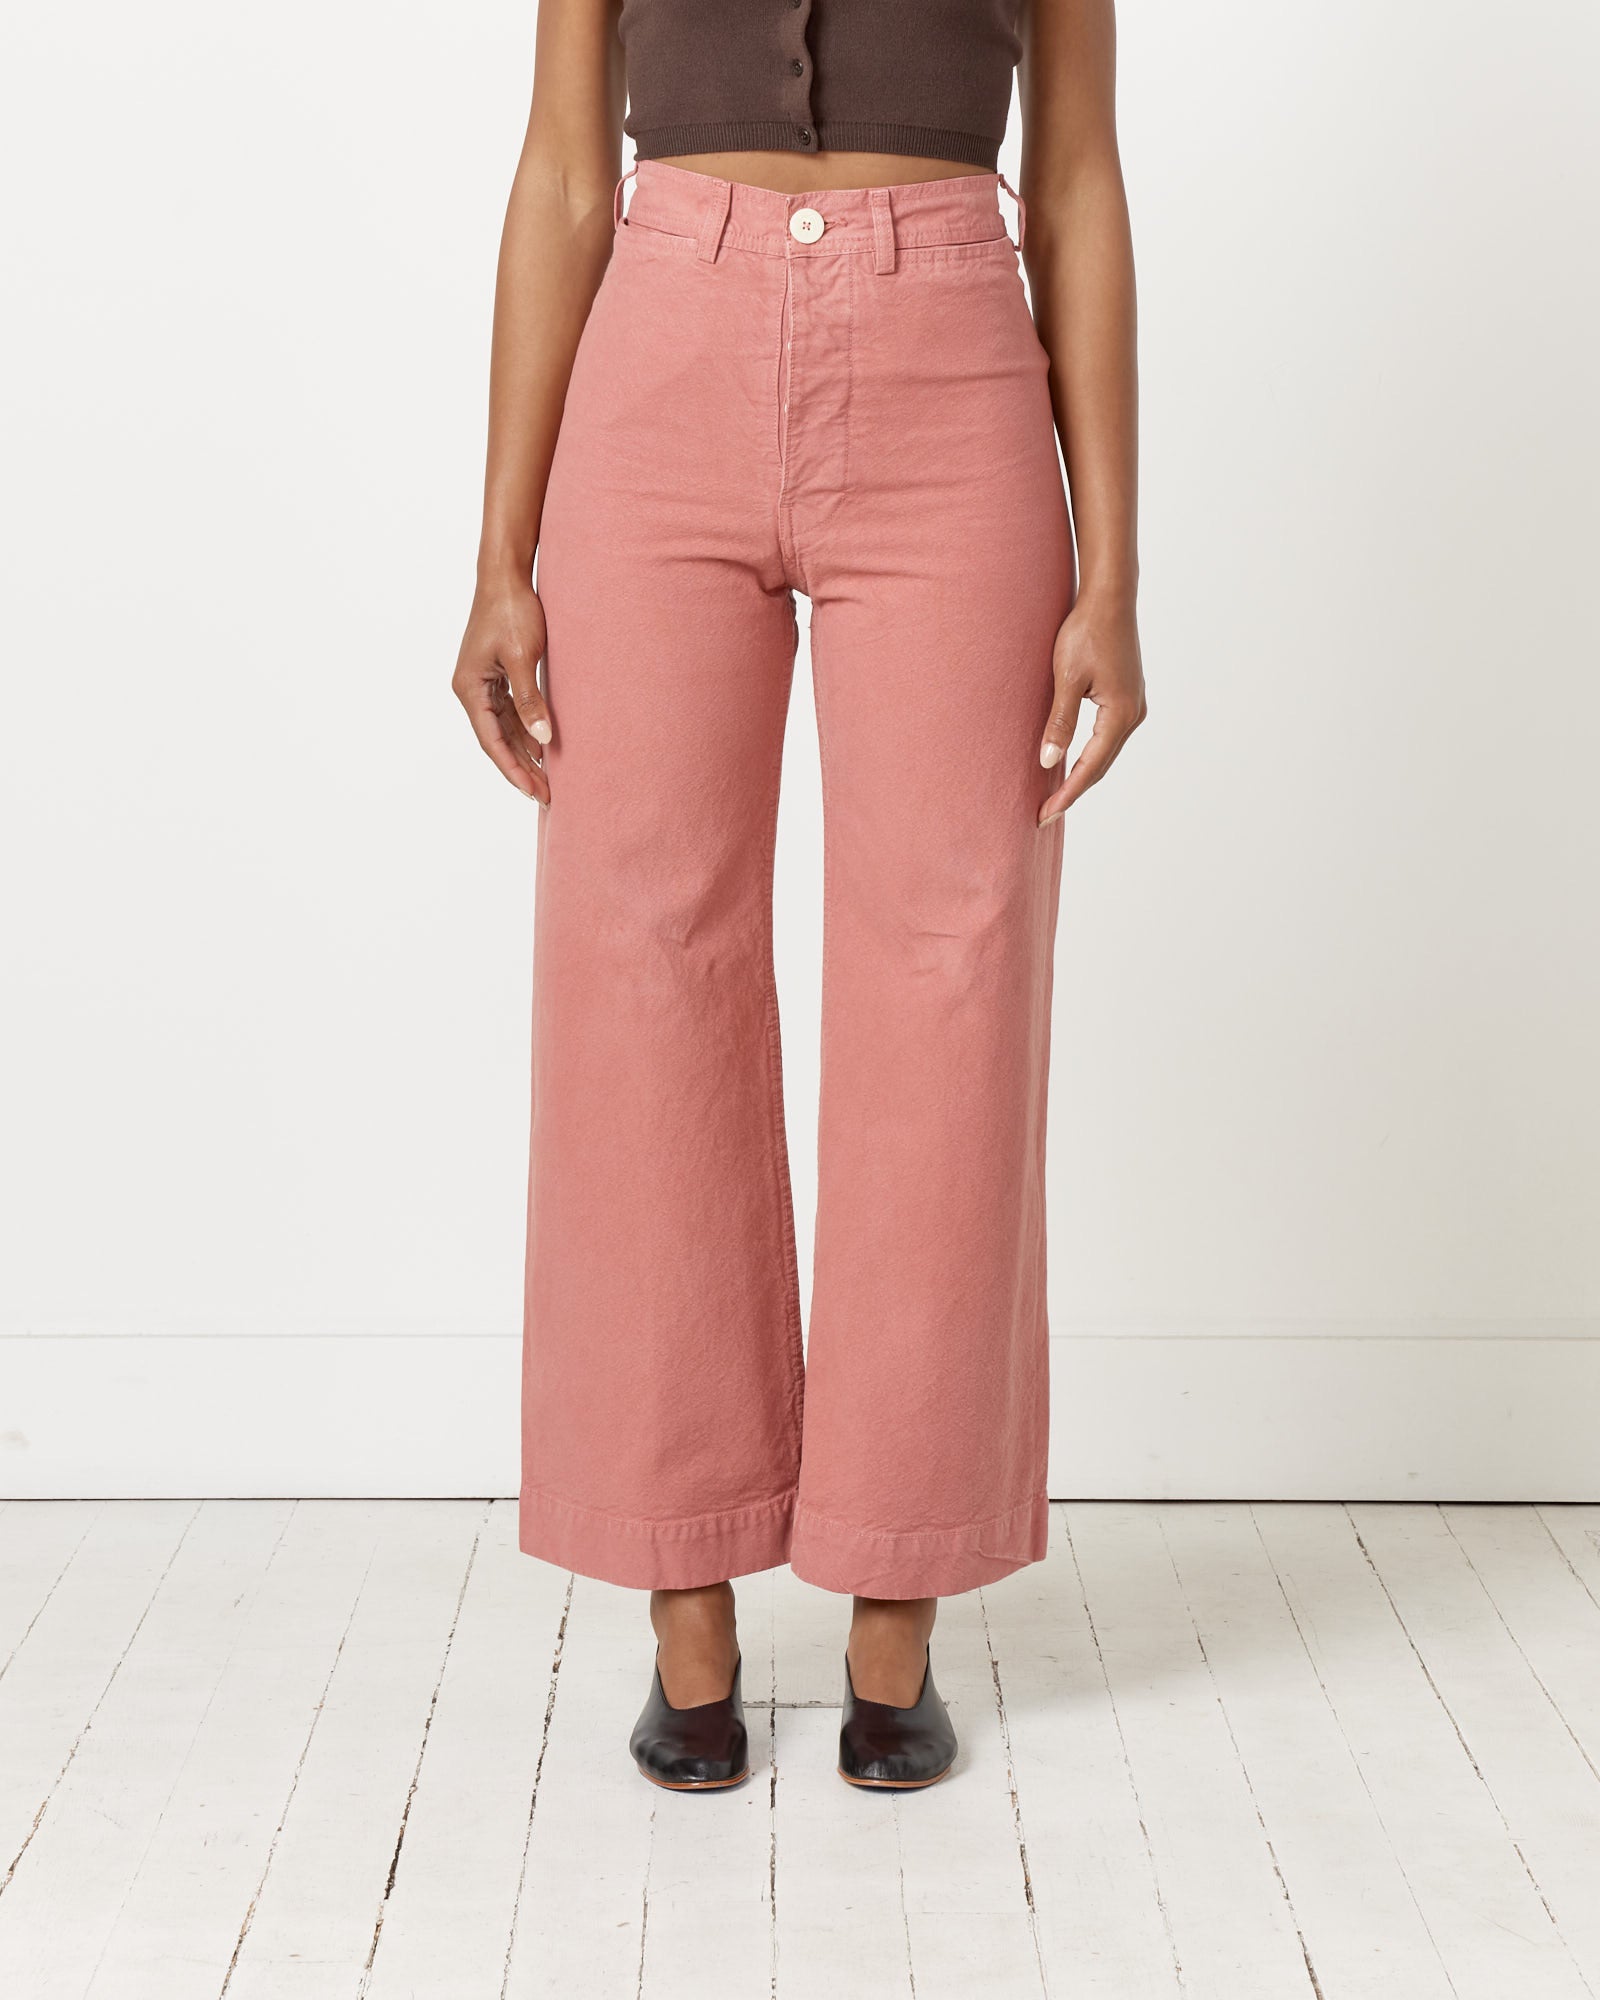 The Sailor Pant in Dogwood